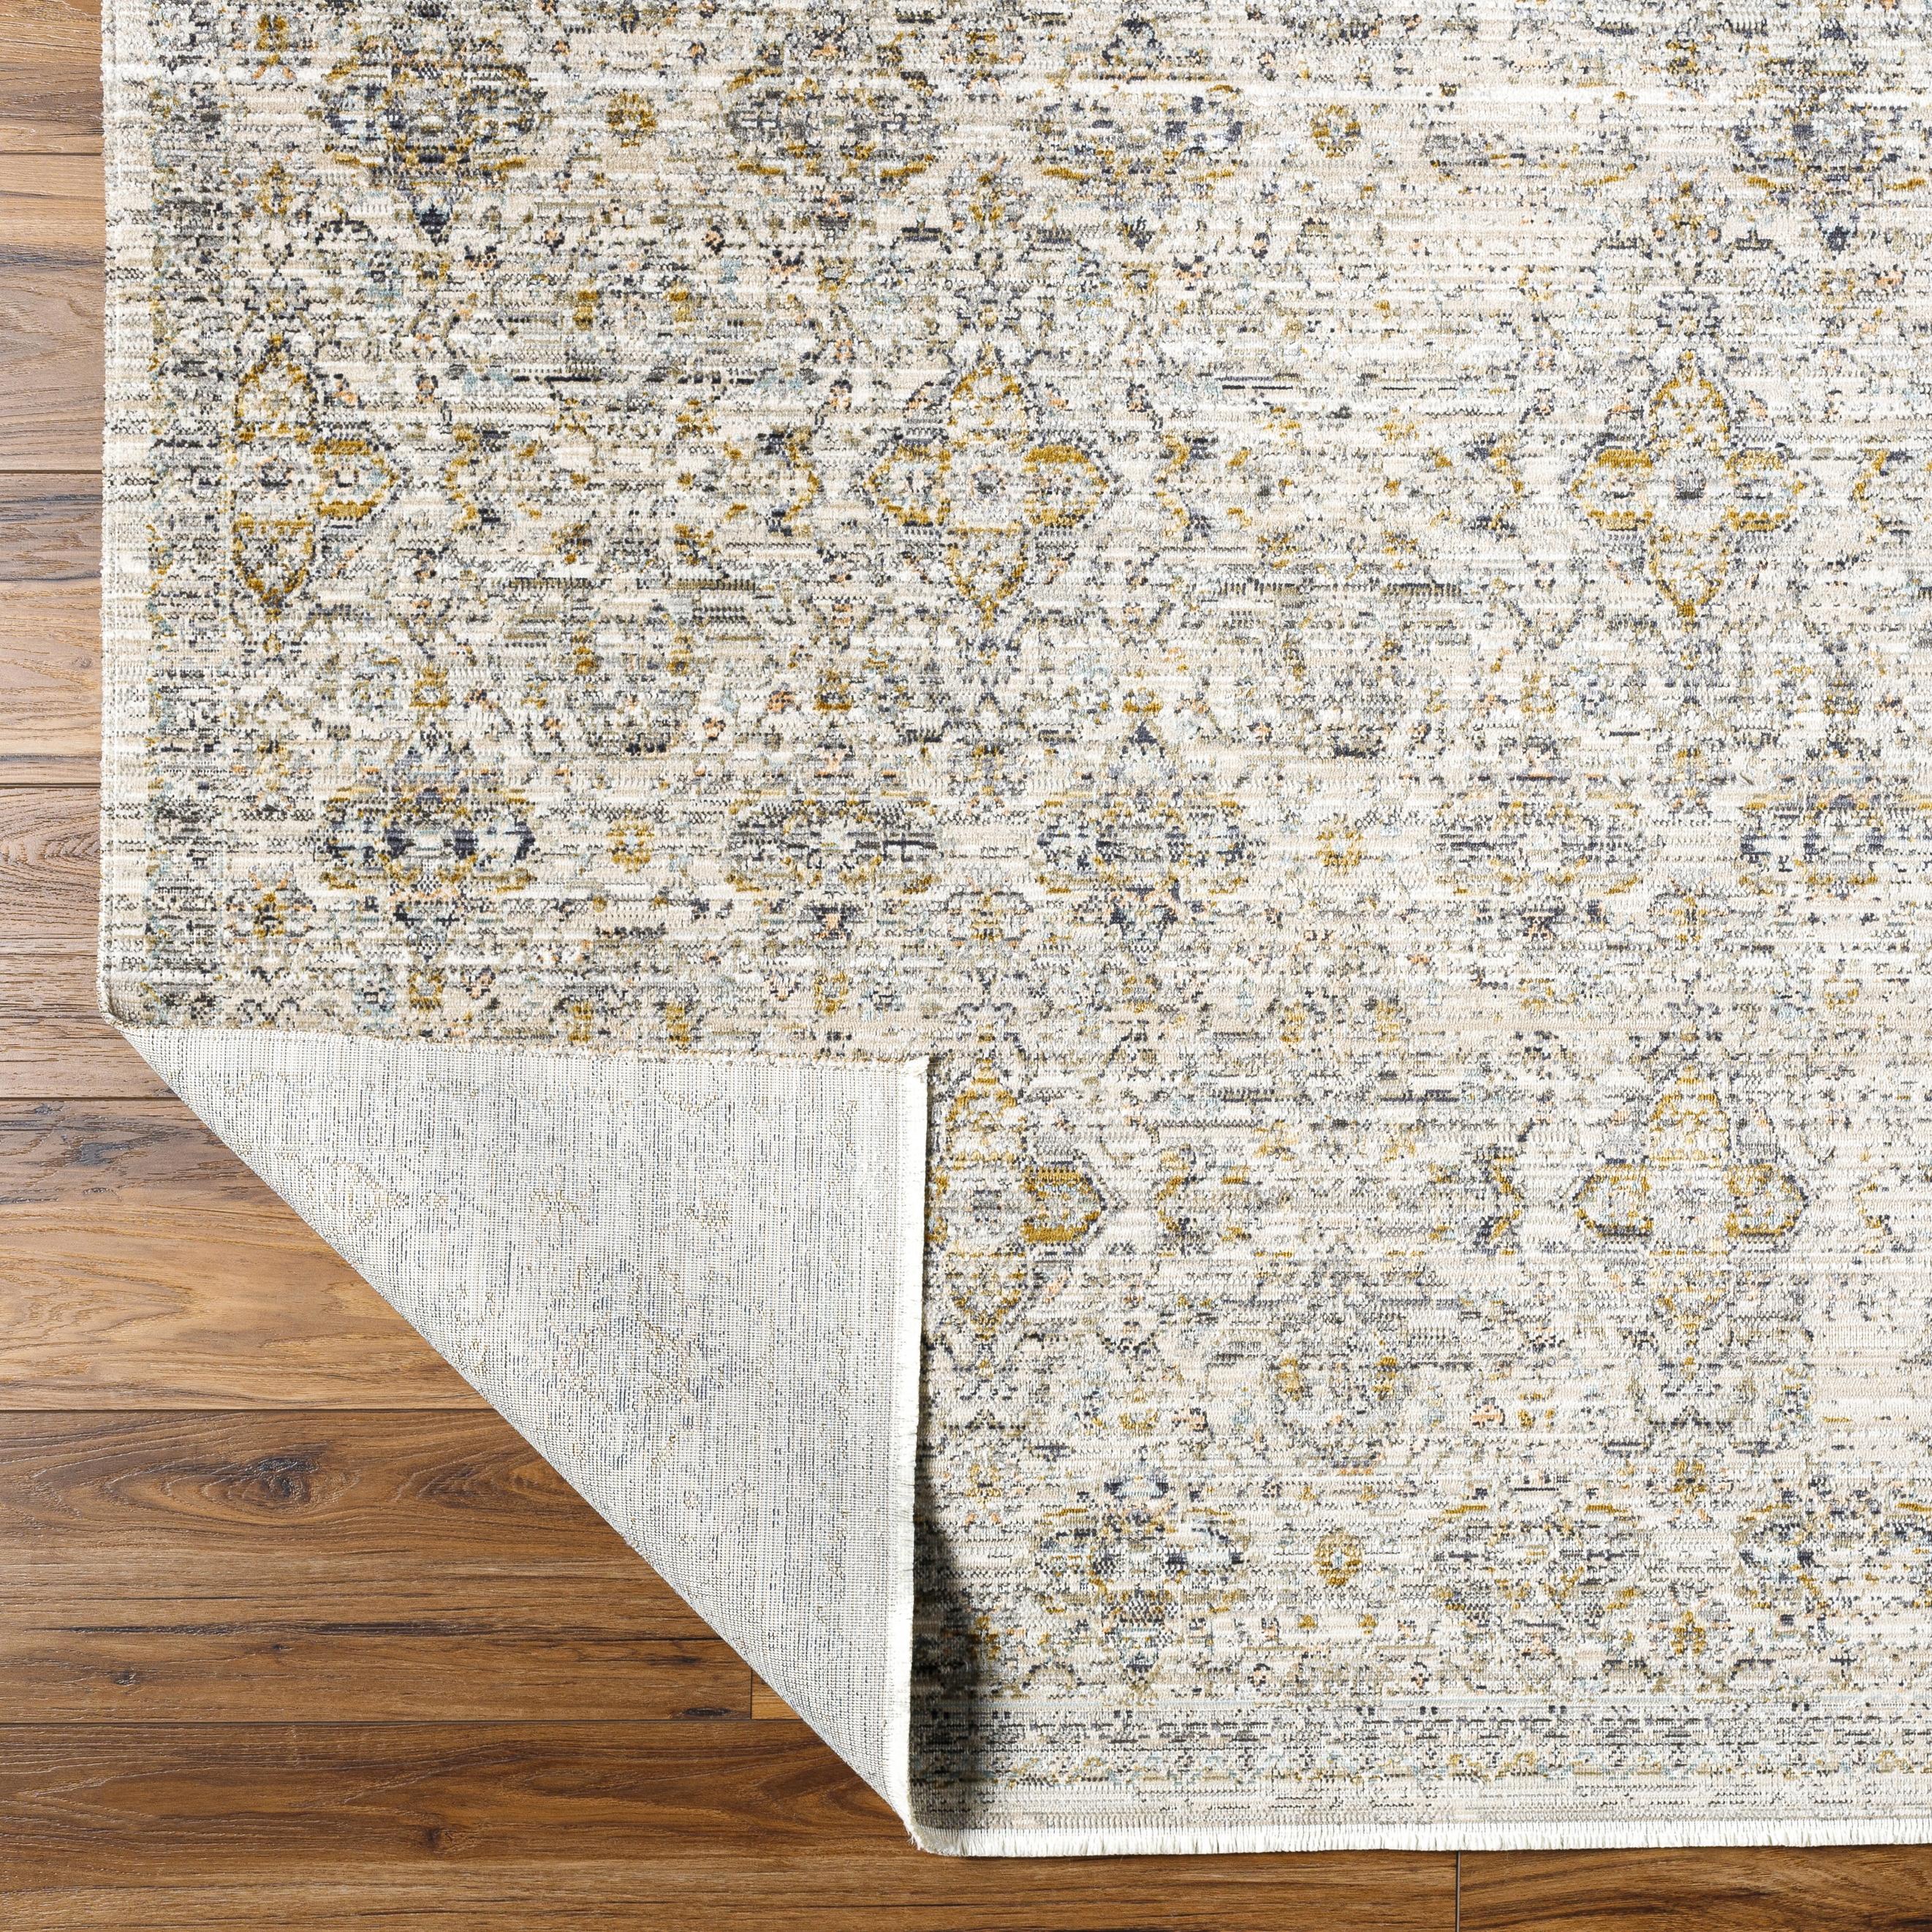 Introduce your home to the timeless beauty of the Margaret area rug! This special piece from our Becki Owens x Surya collaboration is the perfect way to add a vintage-inspired touch to any space. Amethyst Home provides interior design, new home construction design consulting, vintage area rugs, and lighting in the Winter Garden metro area.